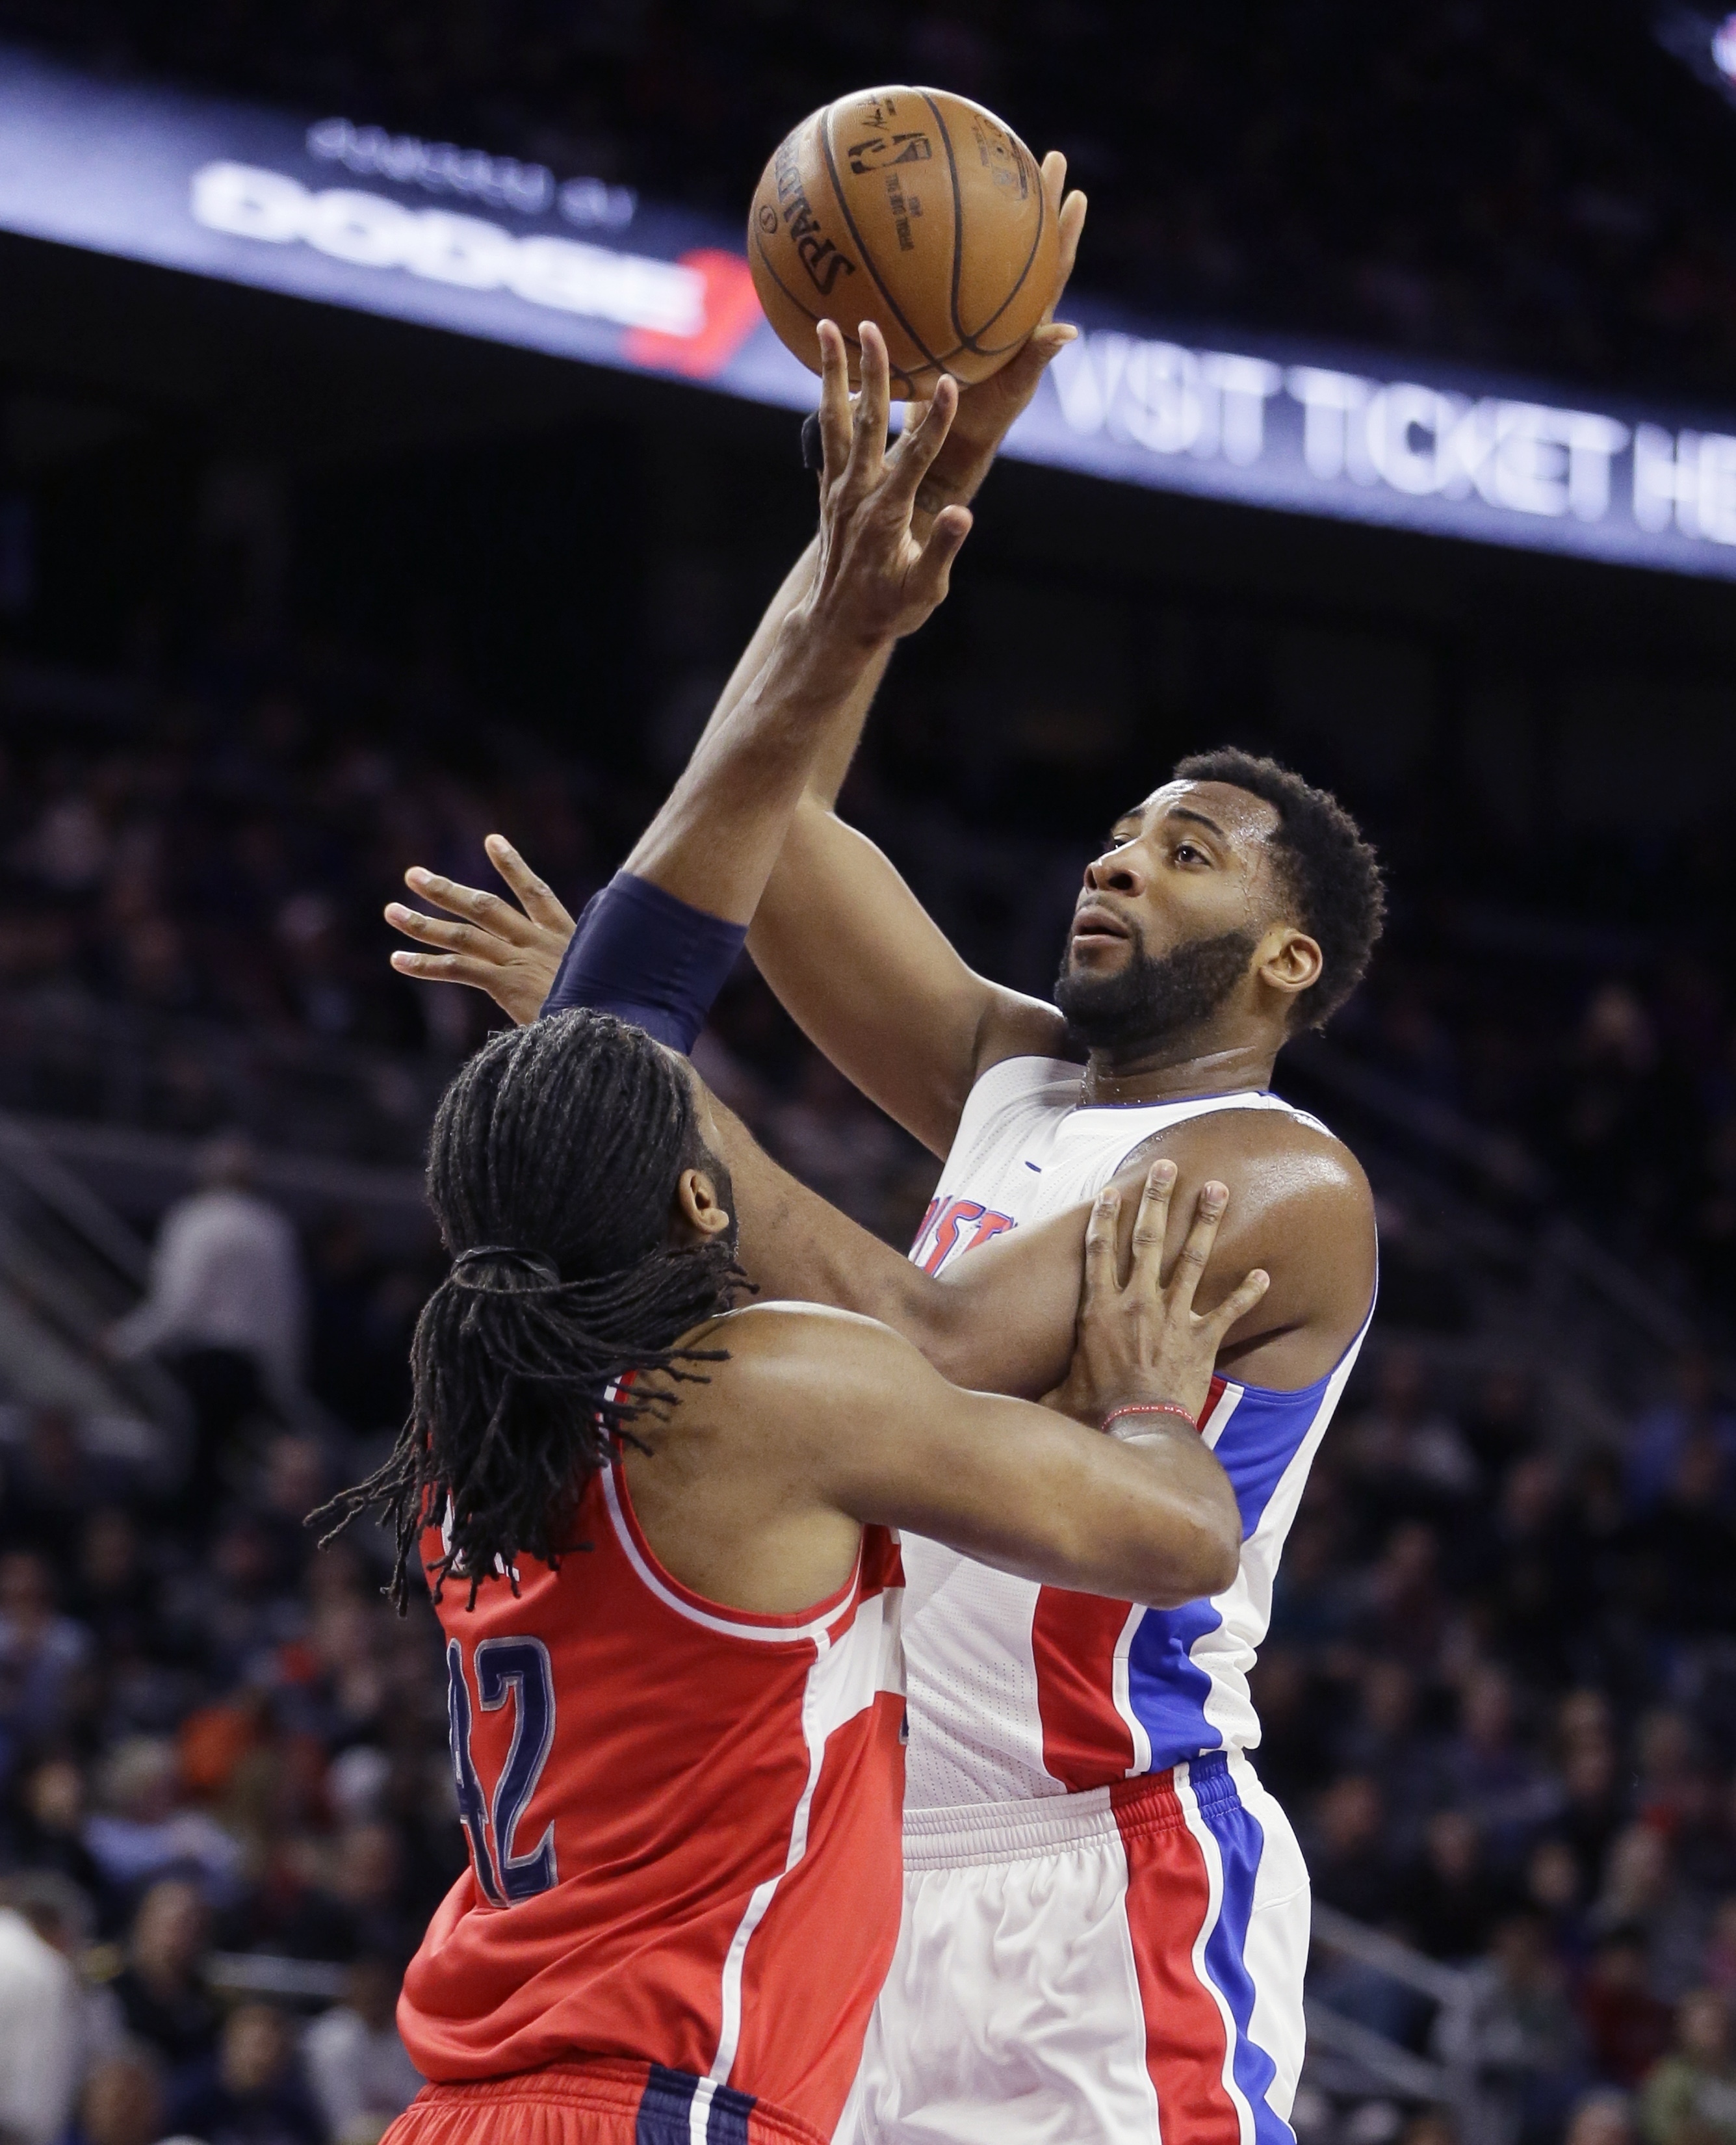 Windsor: Pistons should be playoff bound, but need Jackson back soon